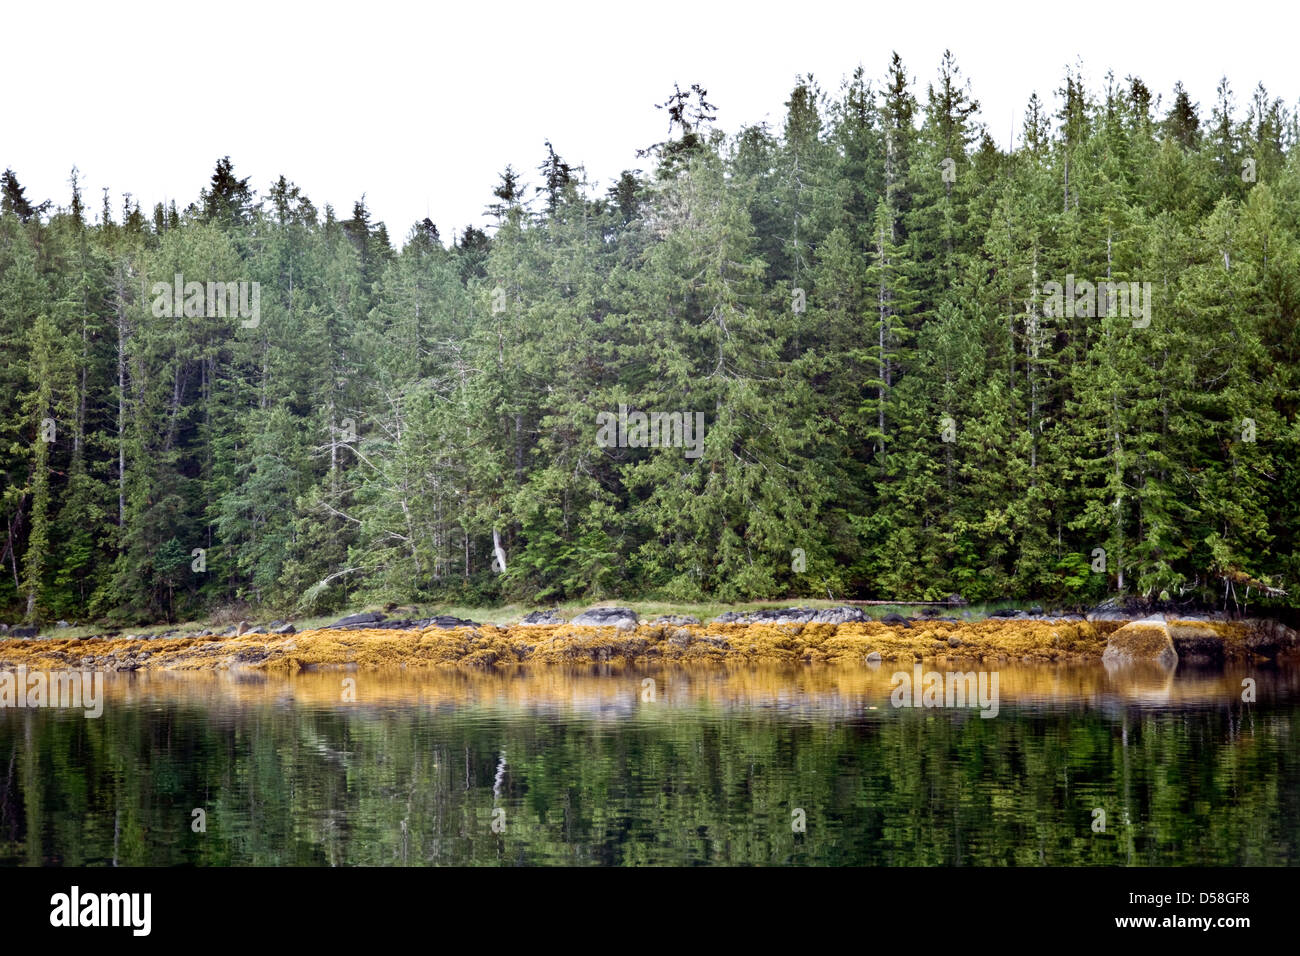 Refections of a forested coastline in the Troup Passage in the scenic Great Bear Rainforest, coastal British Columbia, Canada. Stock Photo